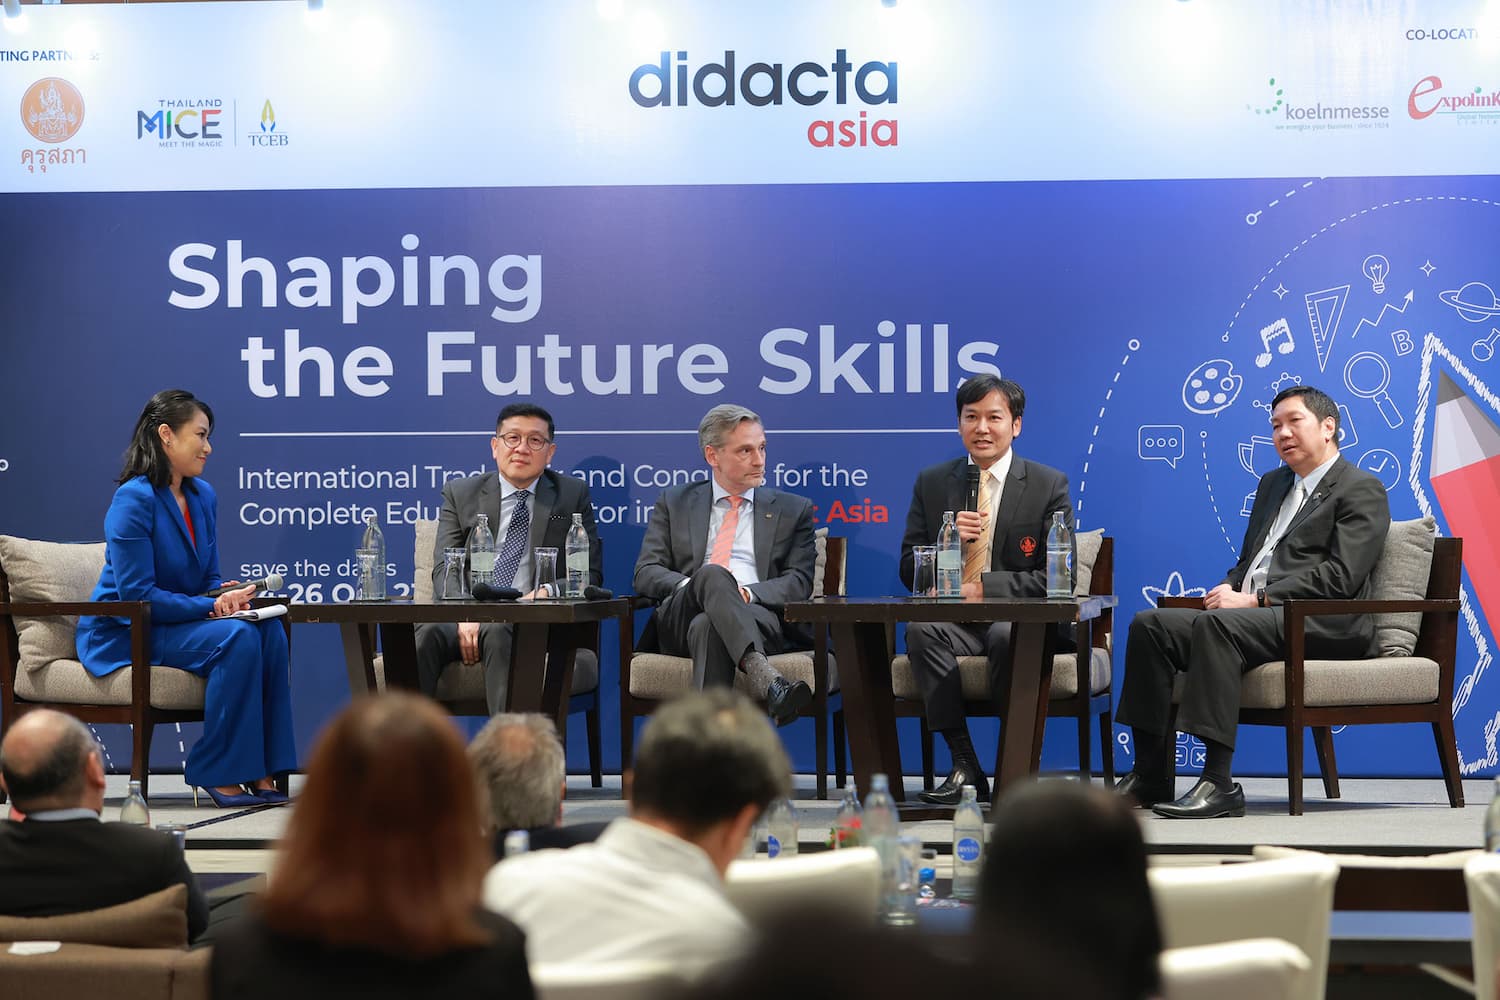 didacta asia - didactaasia03 1 - ภาพที่ 1